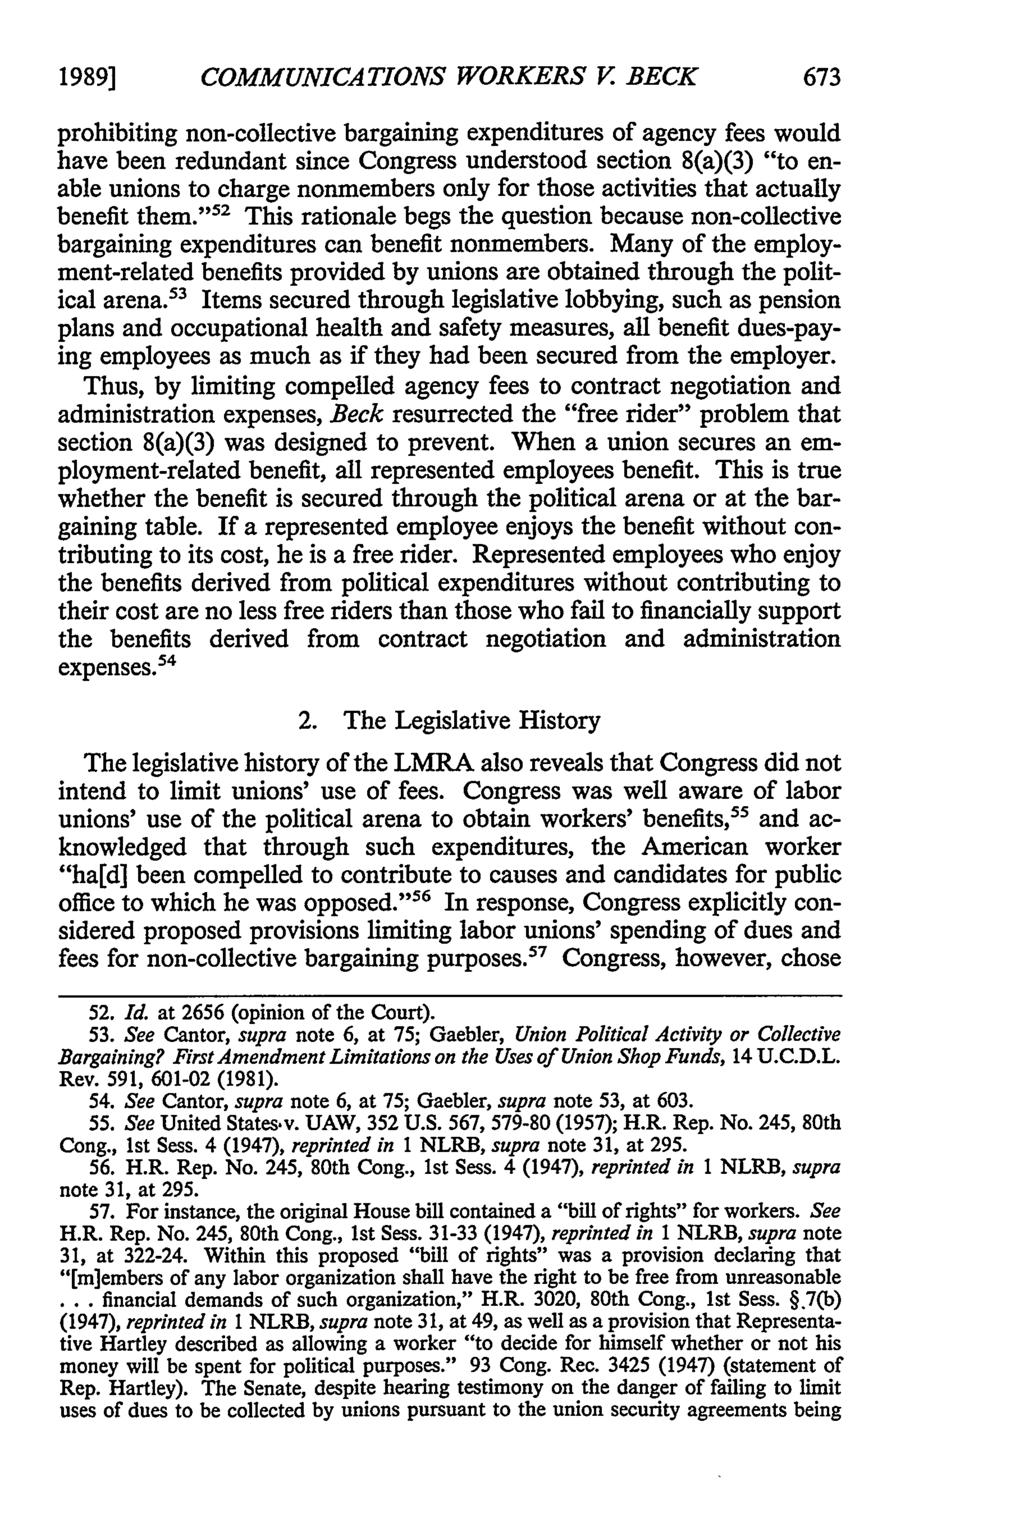 1989] COMMUNICATIONS WORKERS V BECK prohibiting non-collective bargaining expenditures of agency fees would have been redundant since Congress understood section 8(a)(3) "to enable unions to charge